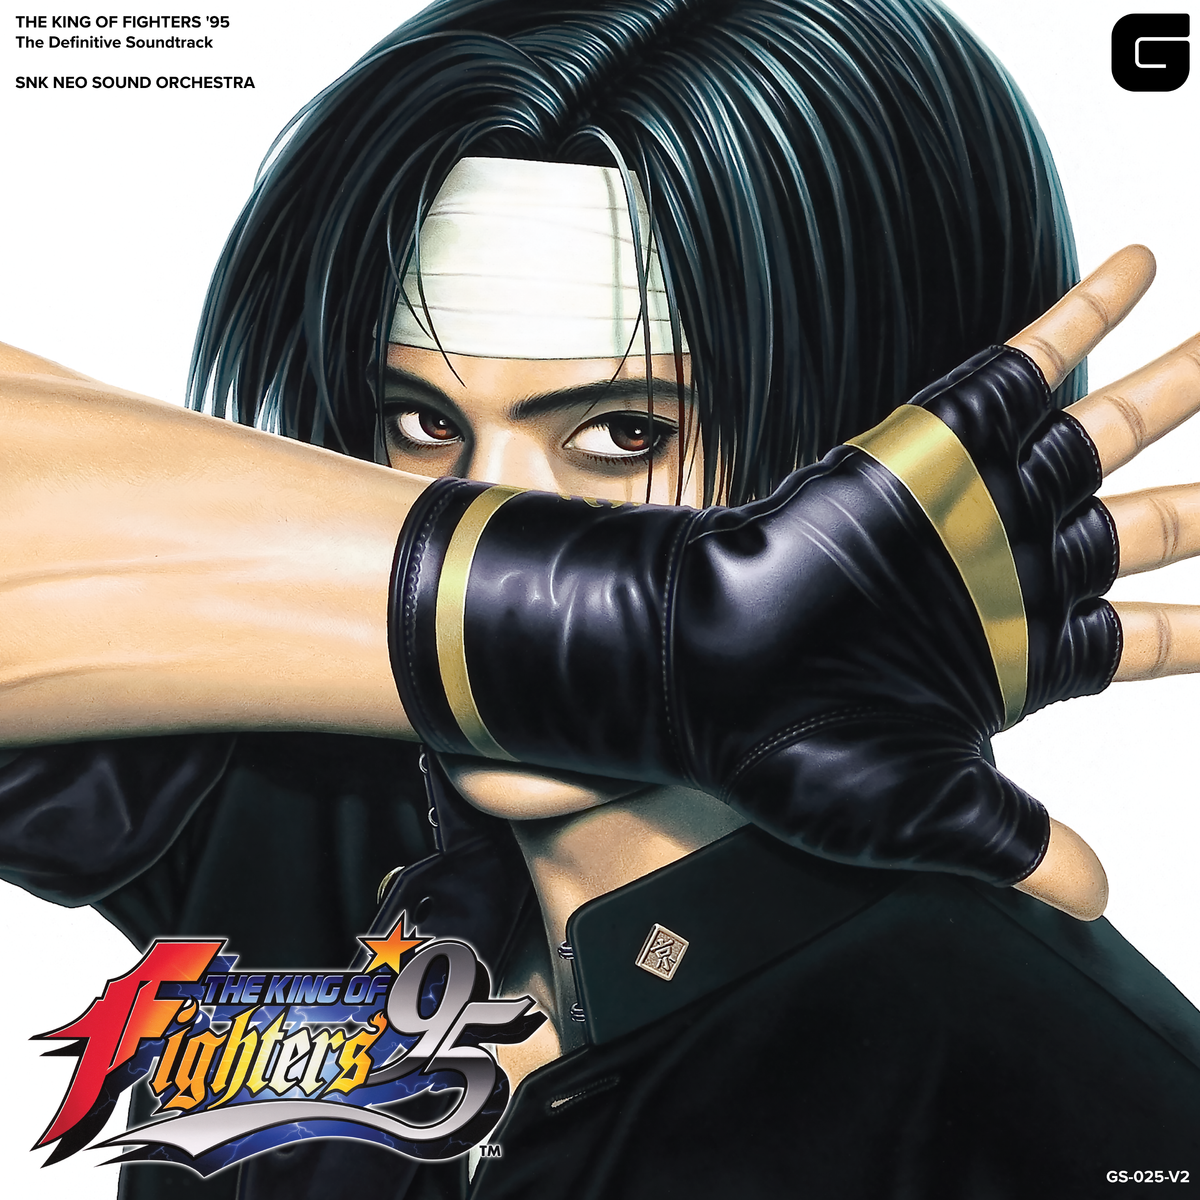 The King of Fighters 98: The Definitive Soundtrack - SNK SOUND ORCHEST